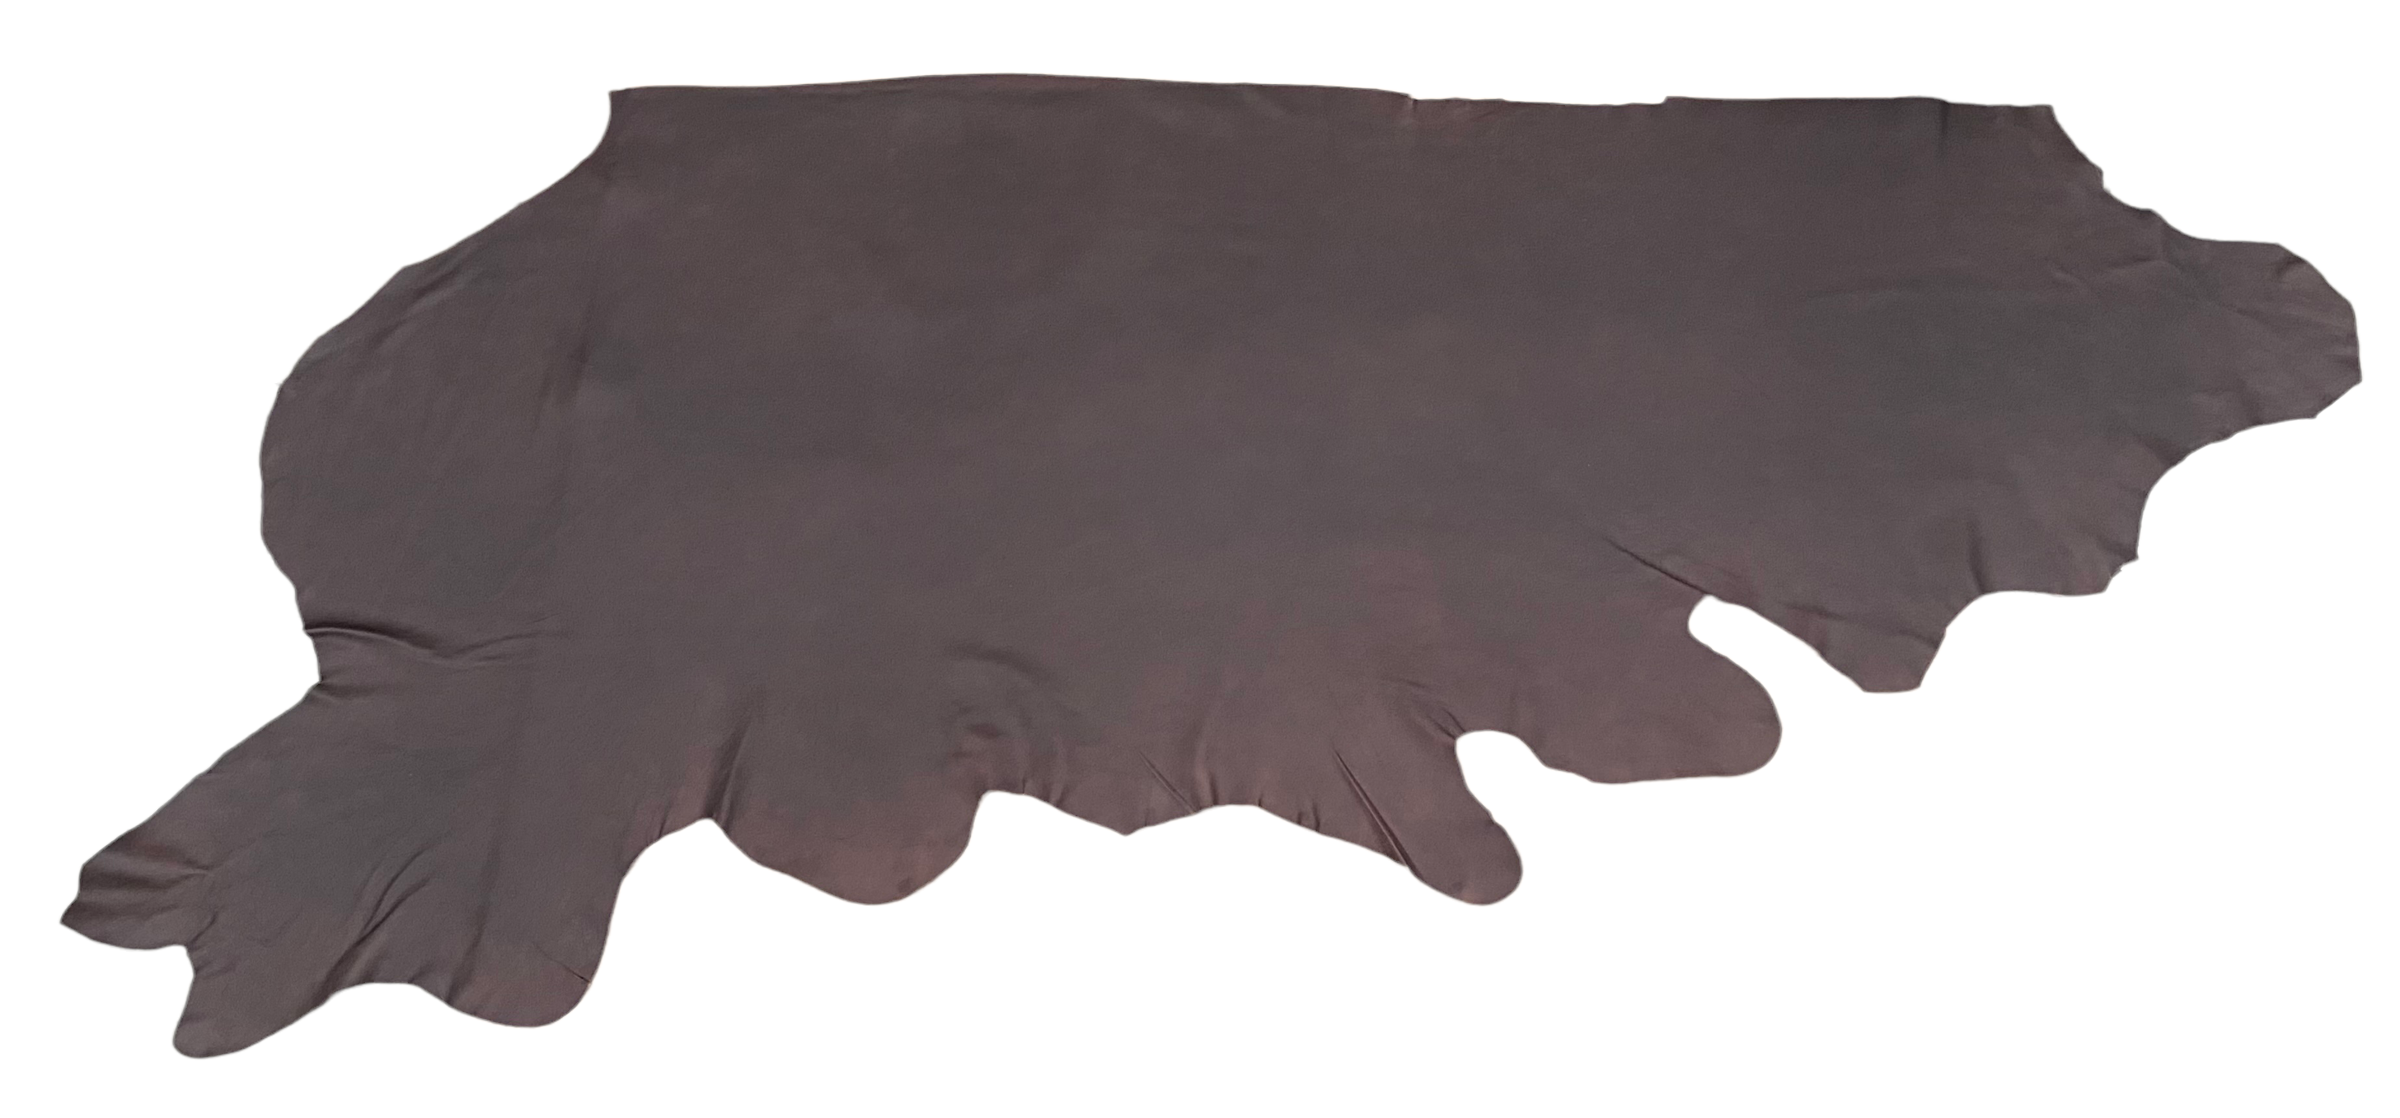 Ranch Brown, Upholstery Leather Cow Hide : (1.2 -1.4mm 3-4oz) 30